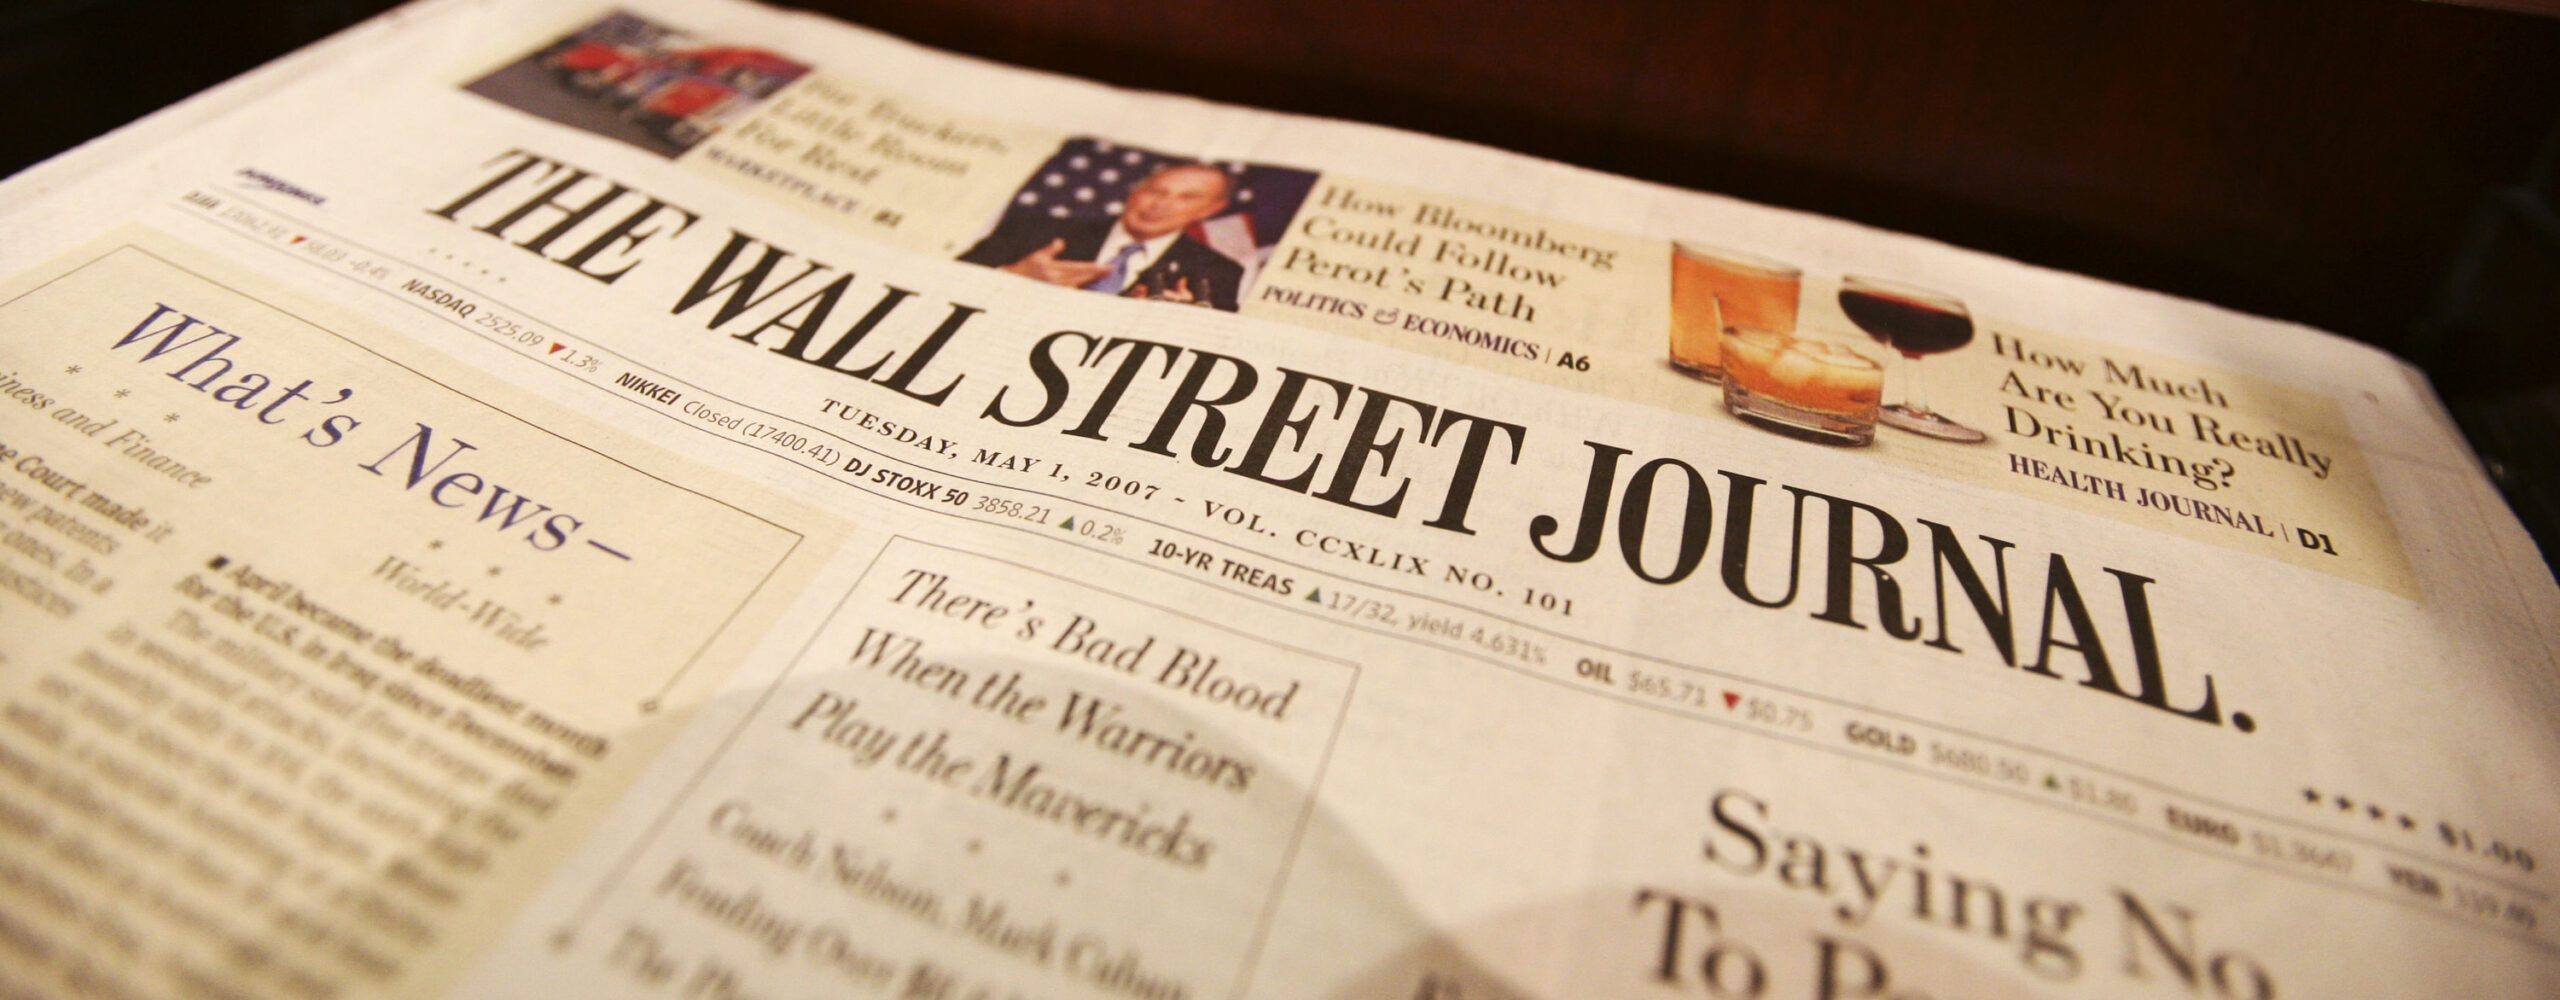 Wall Street Journal Wades Into Water Conservation